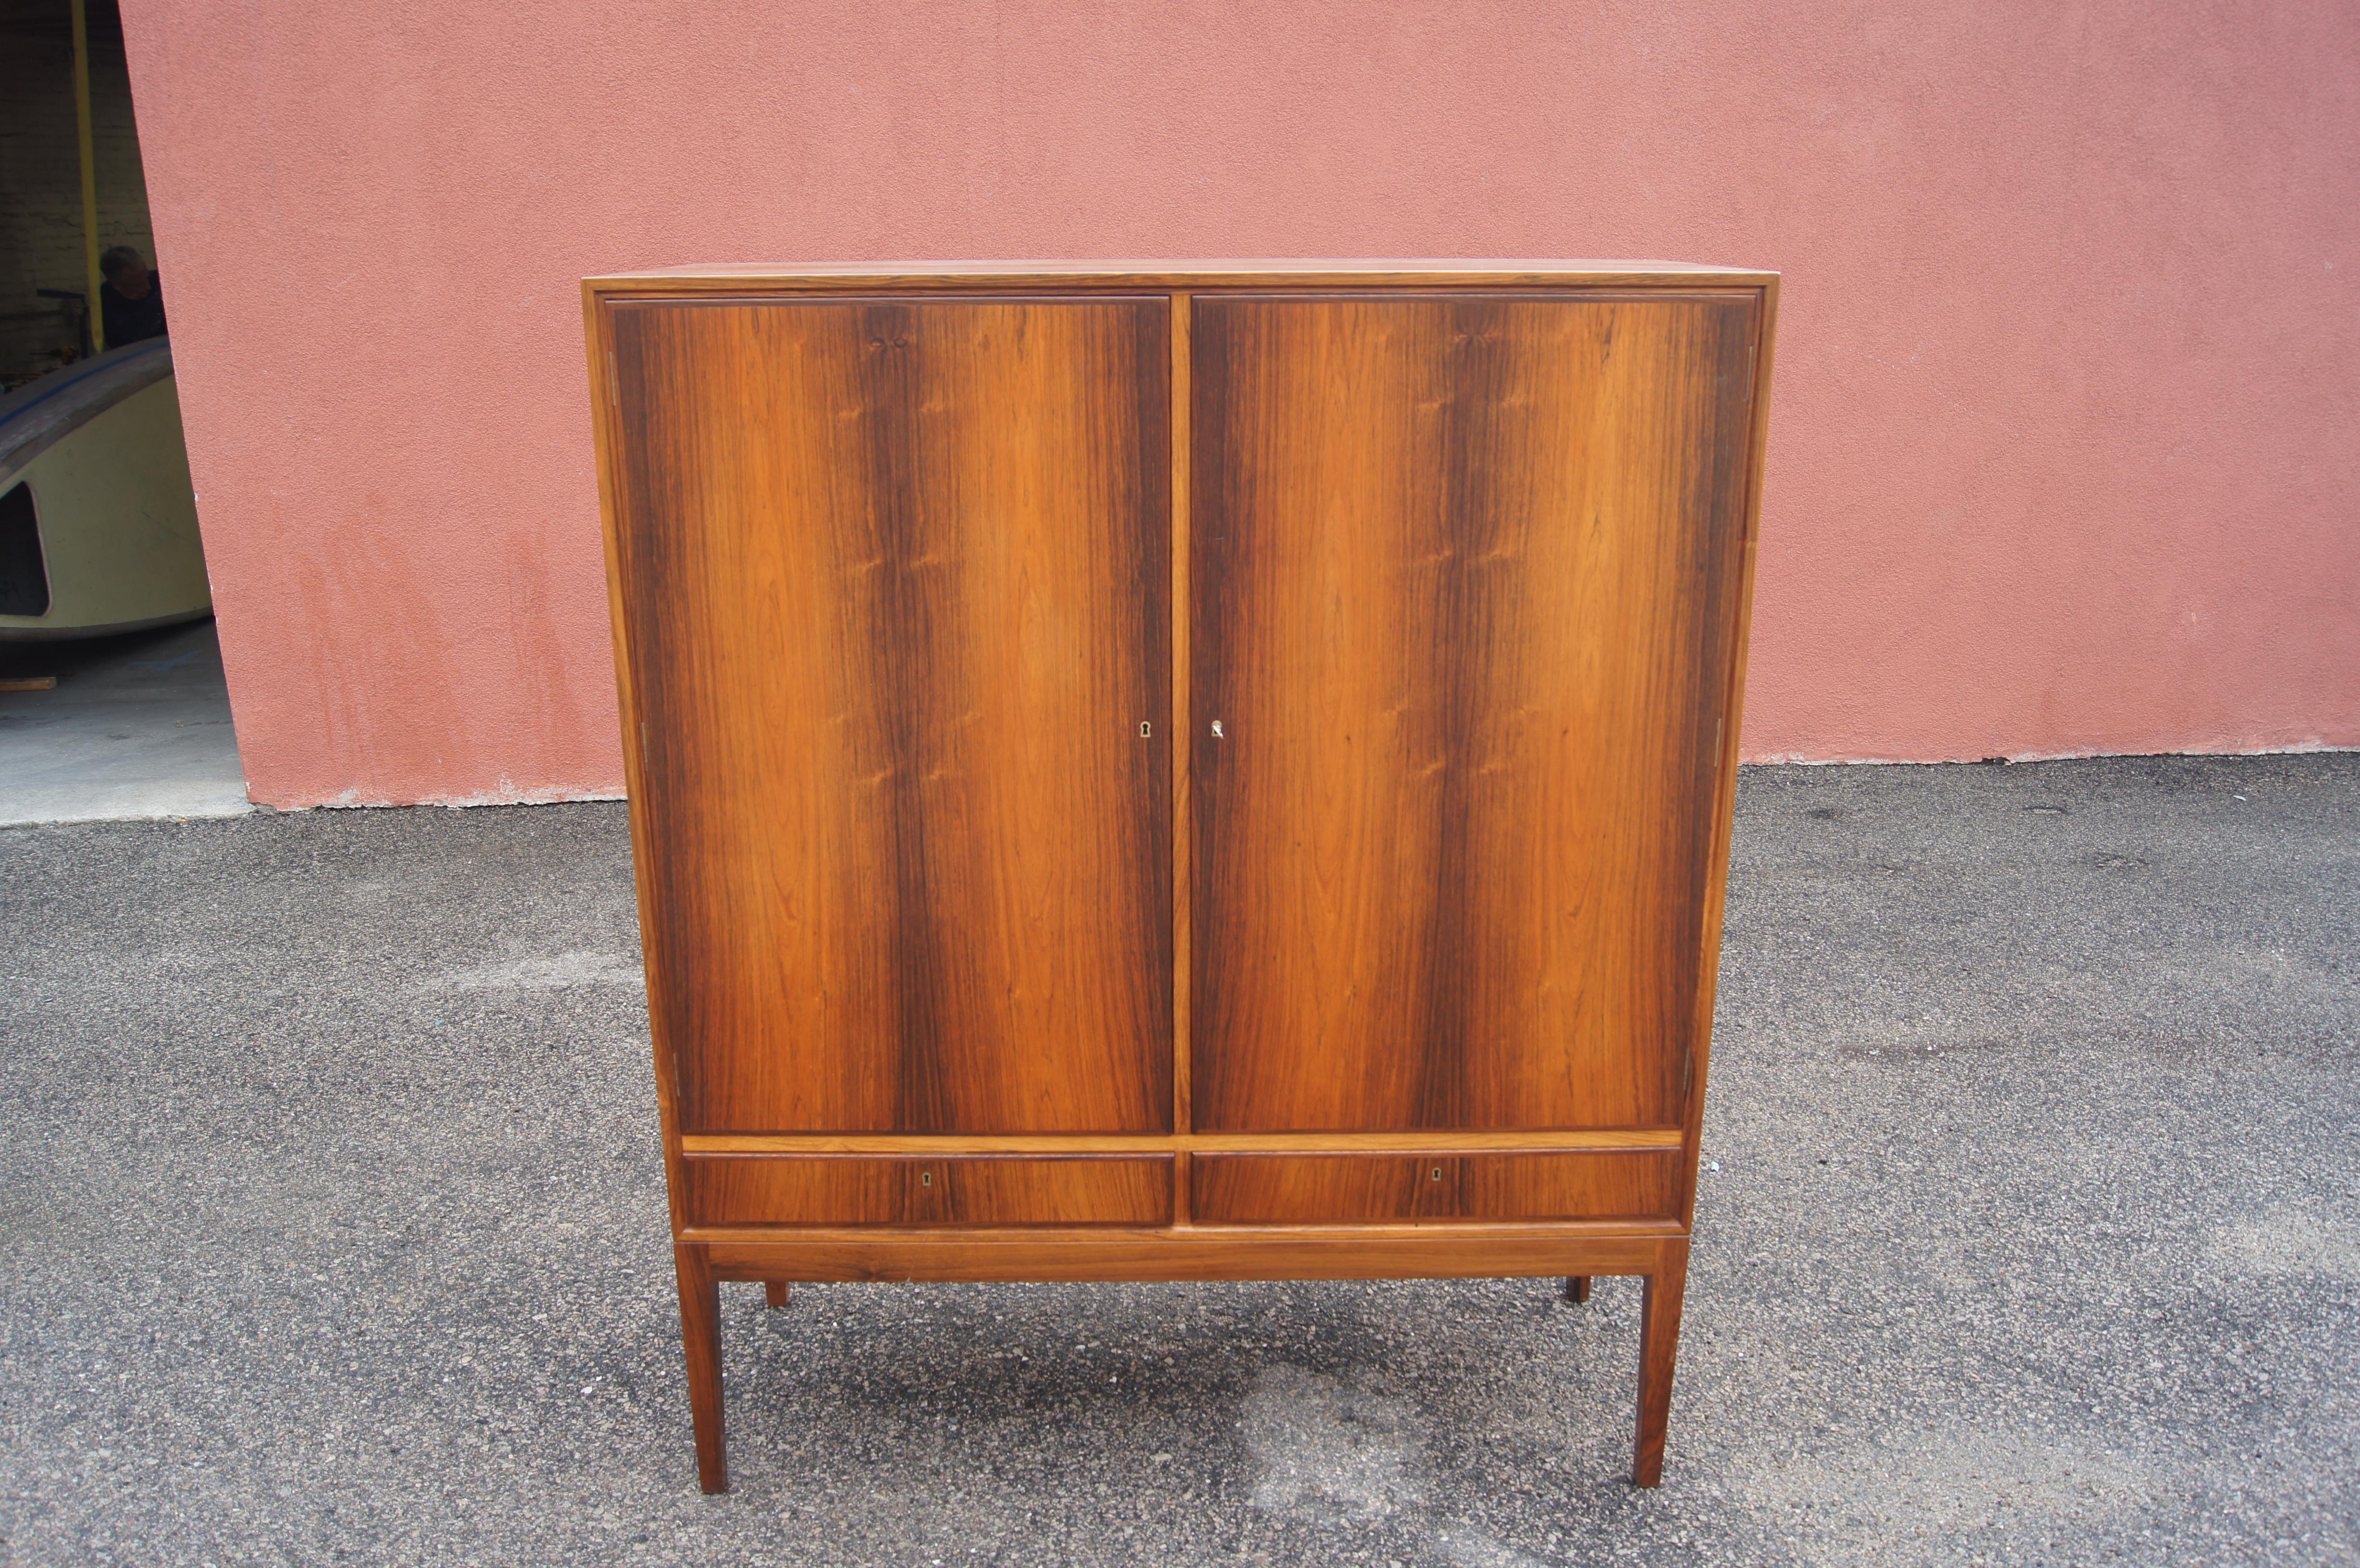 This striking Danish modern cabinet features a tall rosewood case perched on slender legs. Behind the doors (locking with the original key) are two sets of four adjustable shelves; three on the right have tray fronts. At bottom are two drawers.